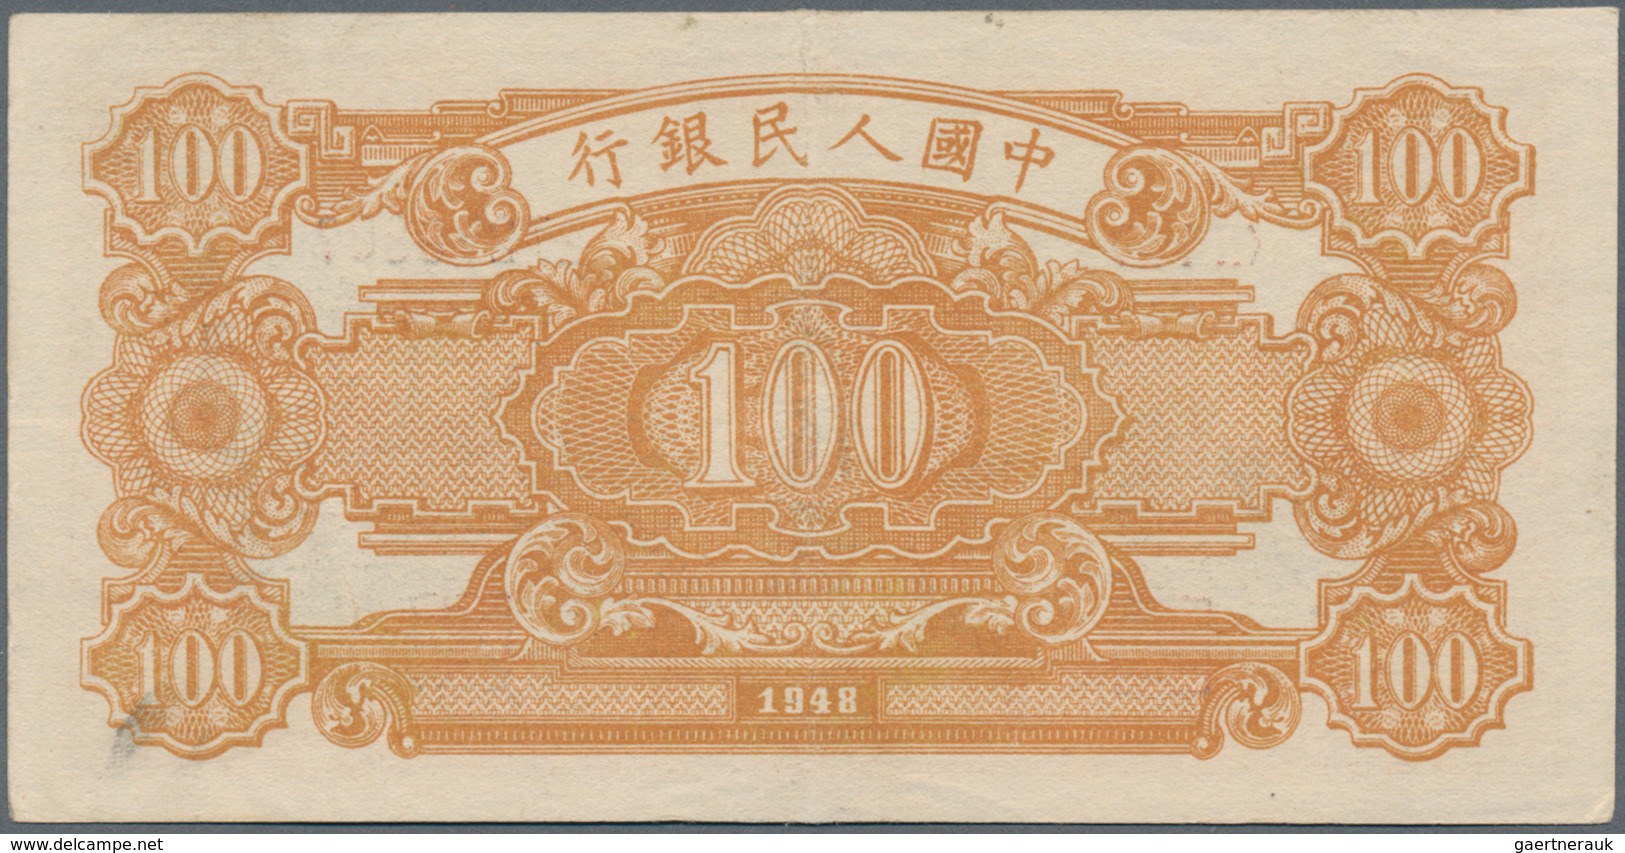 China: Peoples Bank Of China 100 Yuan 1948, P.808, Excellent Condition With A Stronger Vertical Fold - China